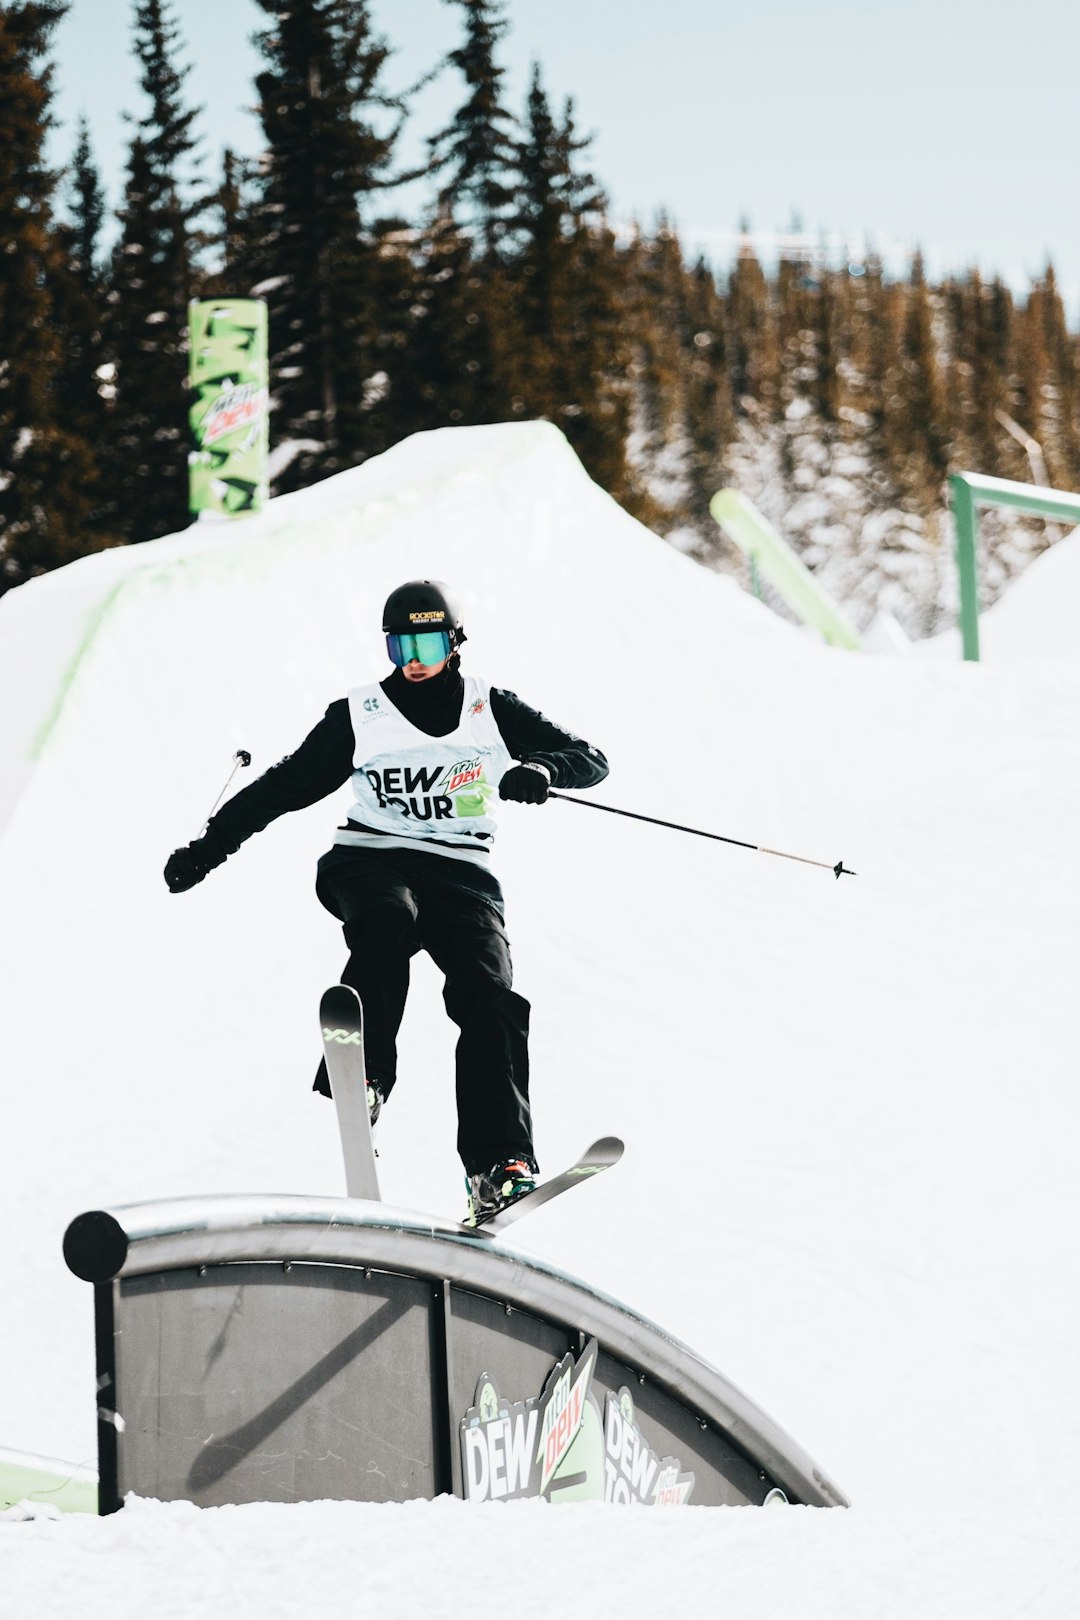 man in blue jacket and black pants riding on black snowboard during daytime